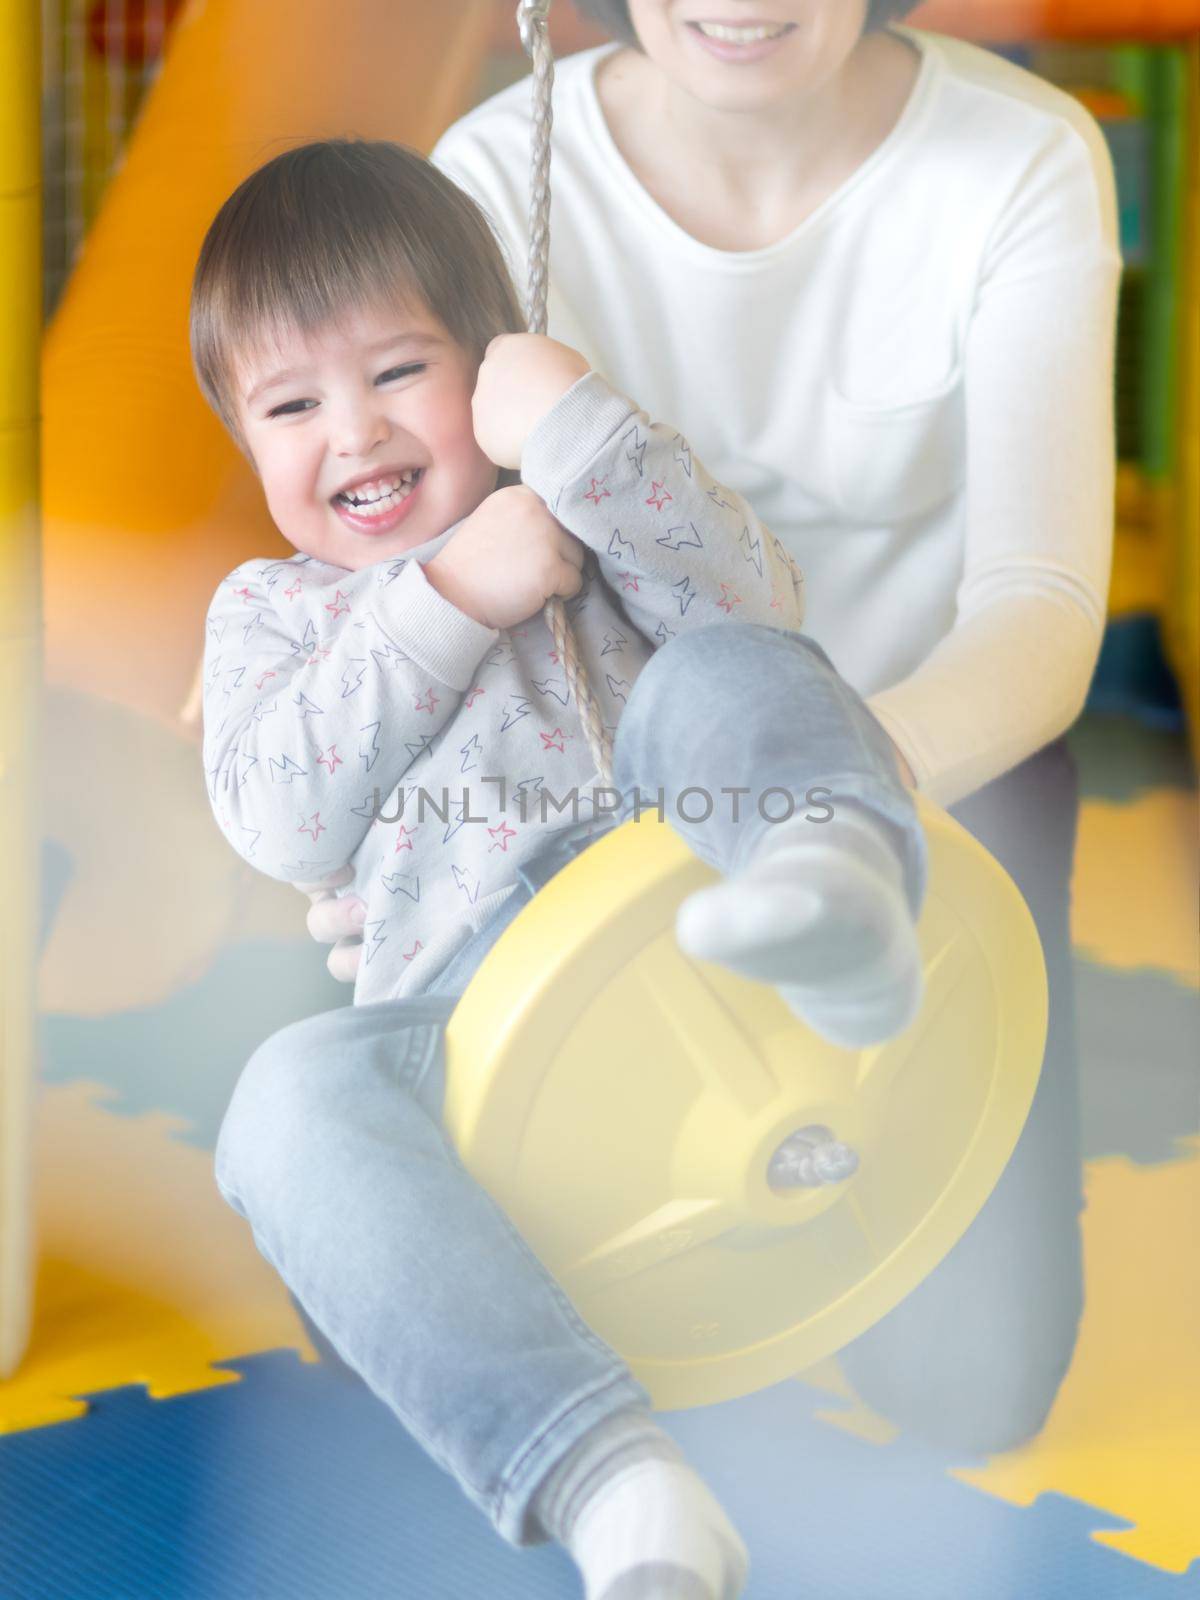 Toddler plays on rope swing with his mother or babysitter. Physical development for little children. Interior of kindergarten or nursery.